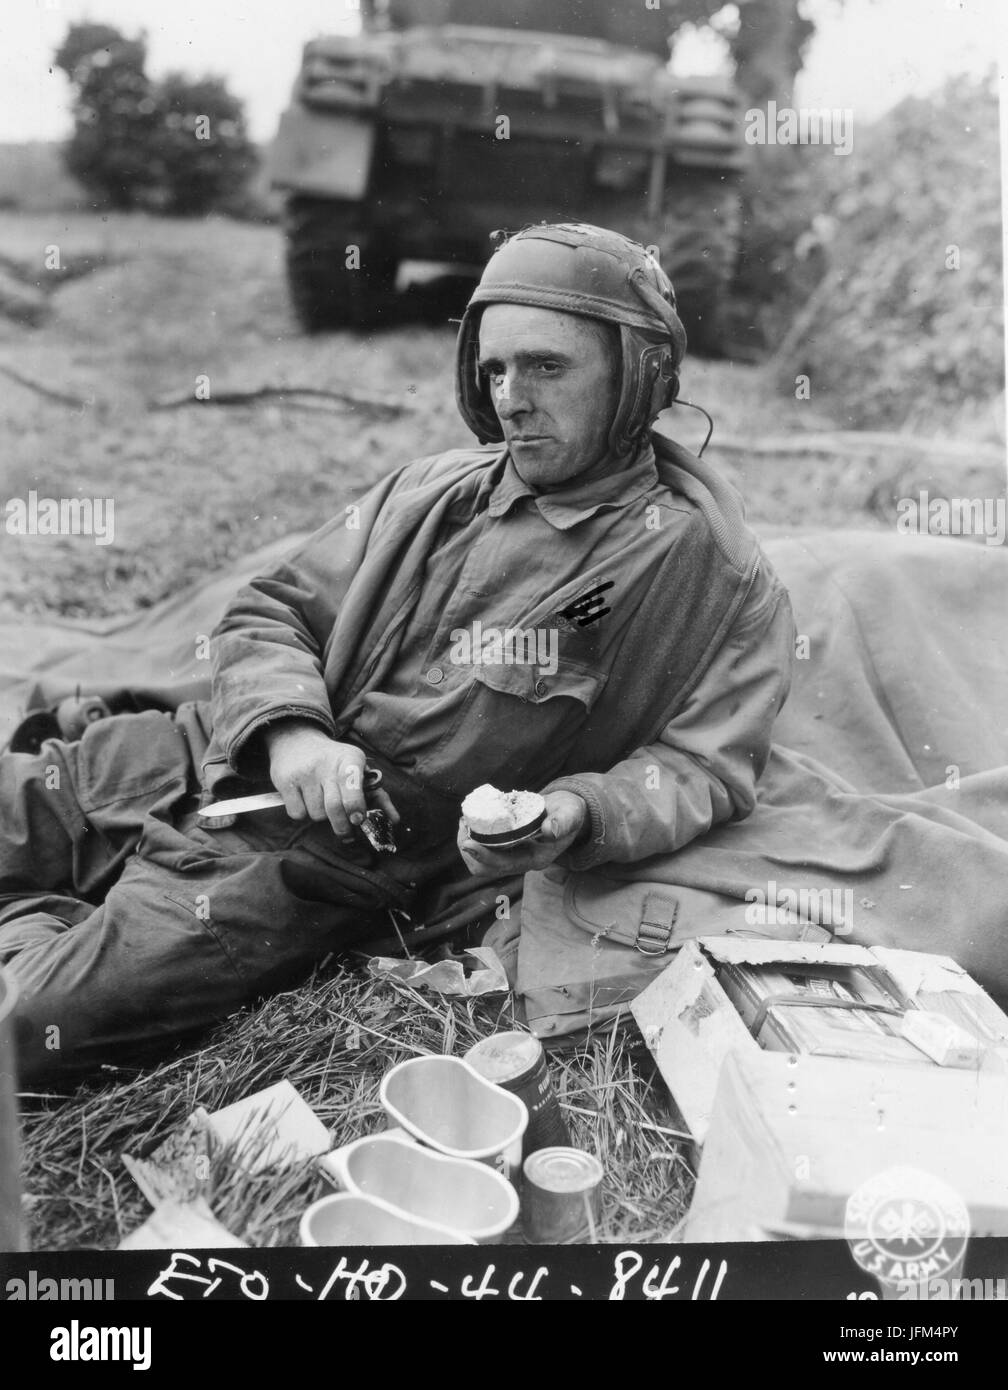 PFC Jerry C. Coleman, assistant driver of a tank attached to an armored unit in France, takes time out during a lull in the action to eat his K rations. July, 1944. Stock Photo